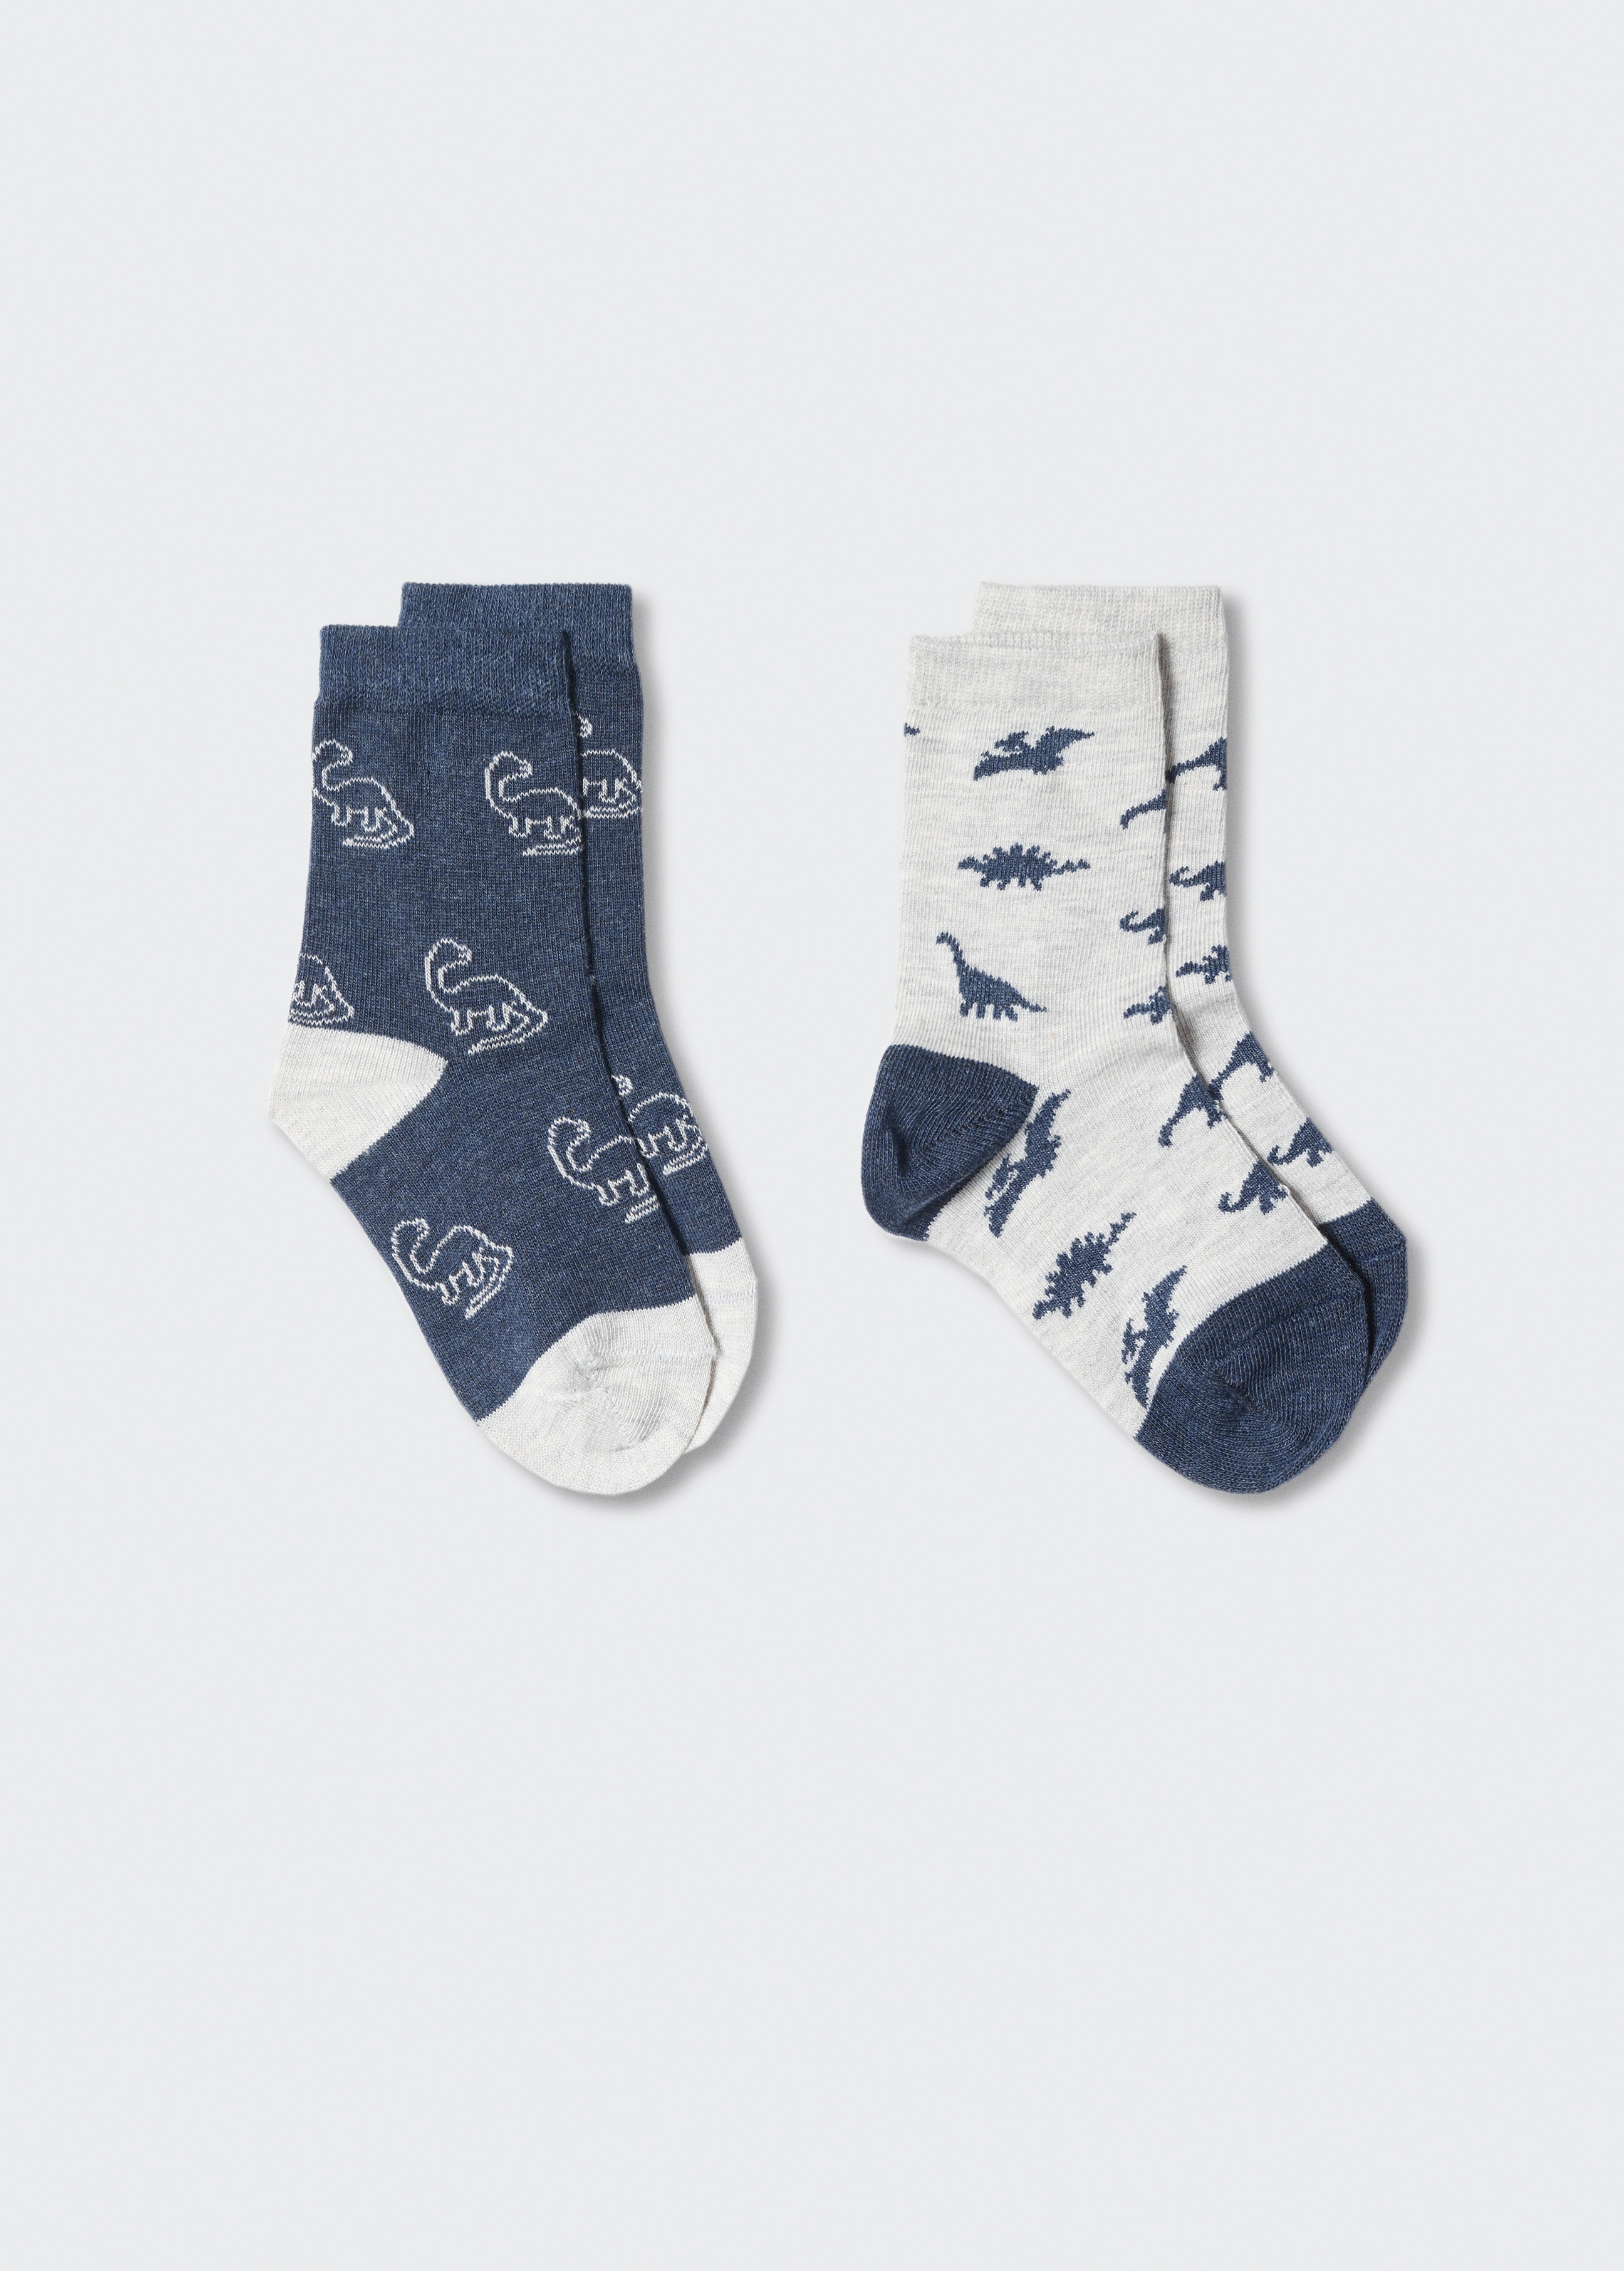 2 pack mixed socks - Article without model